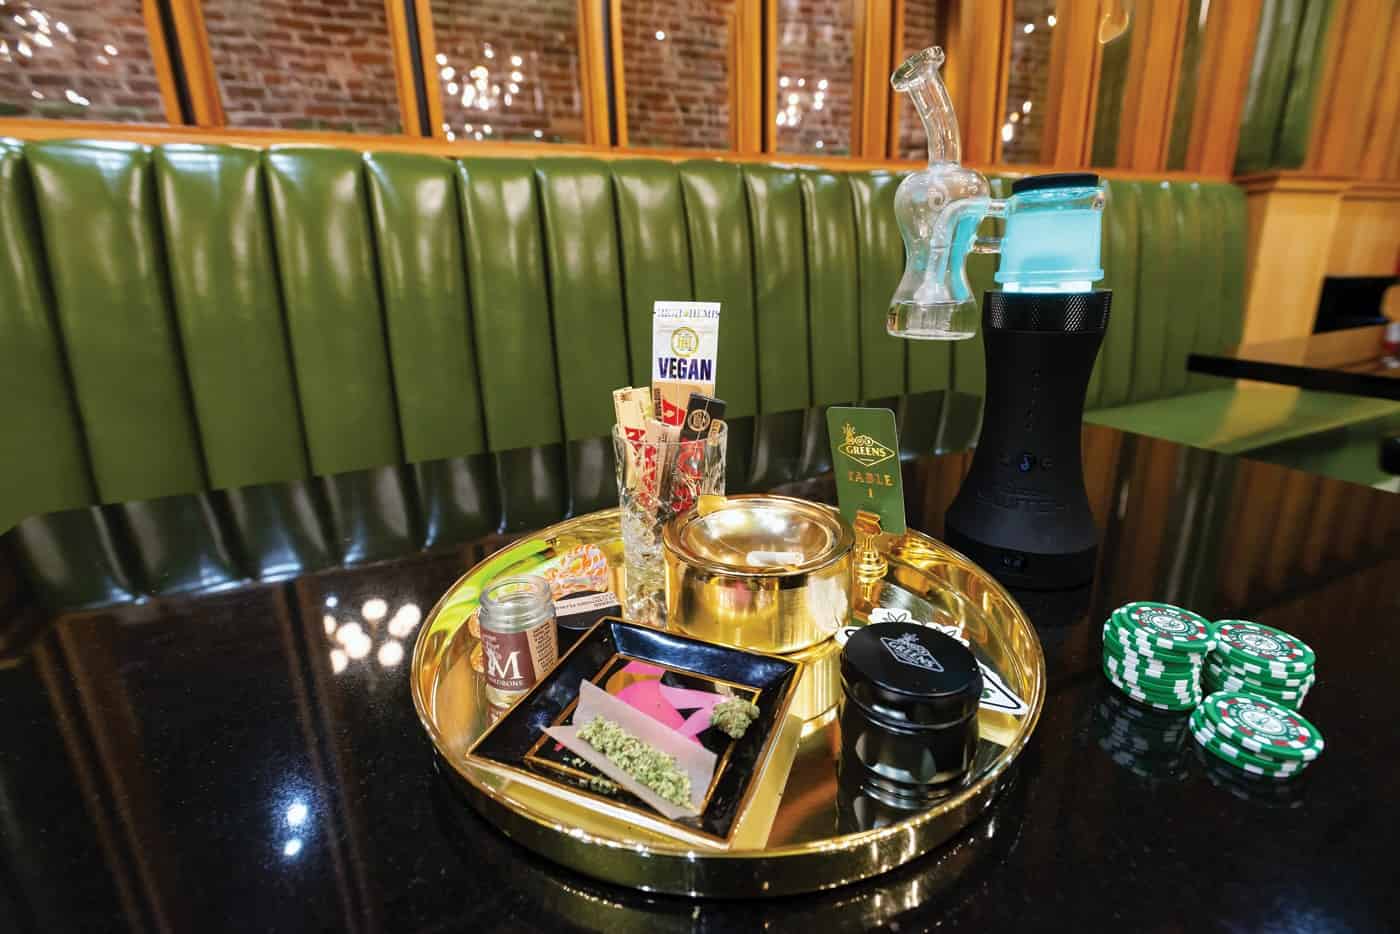 Moe Greens High Roller lounge table with cannabis products displayed